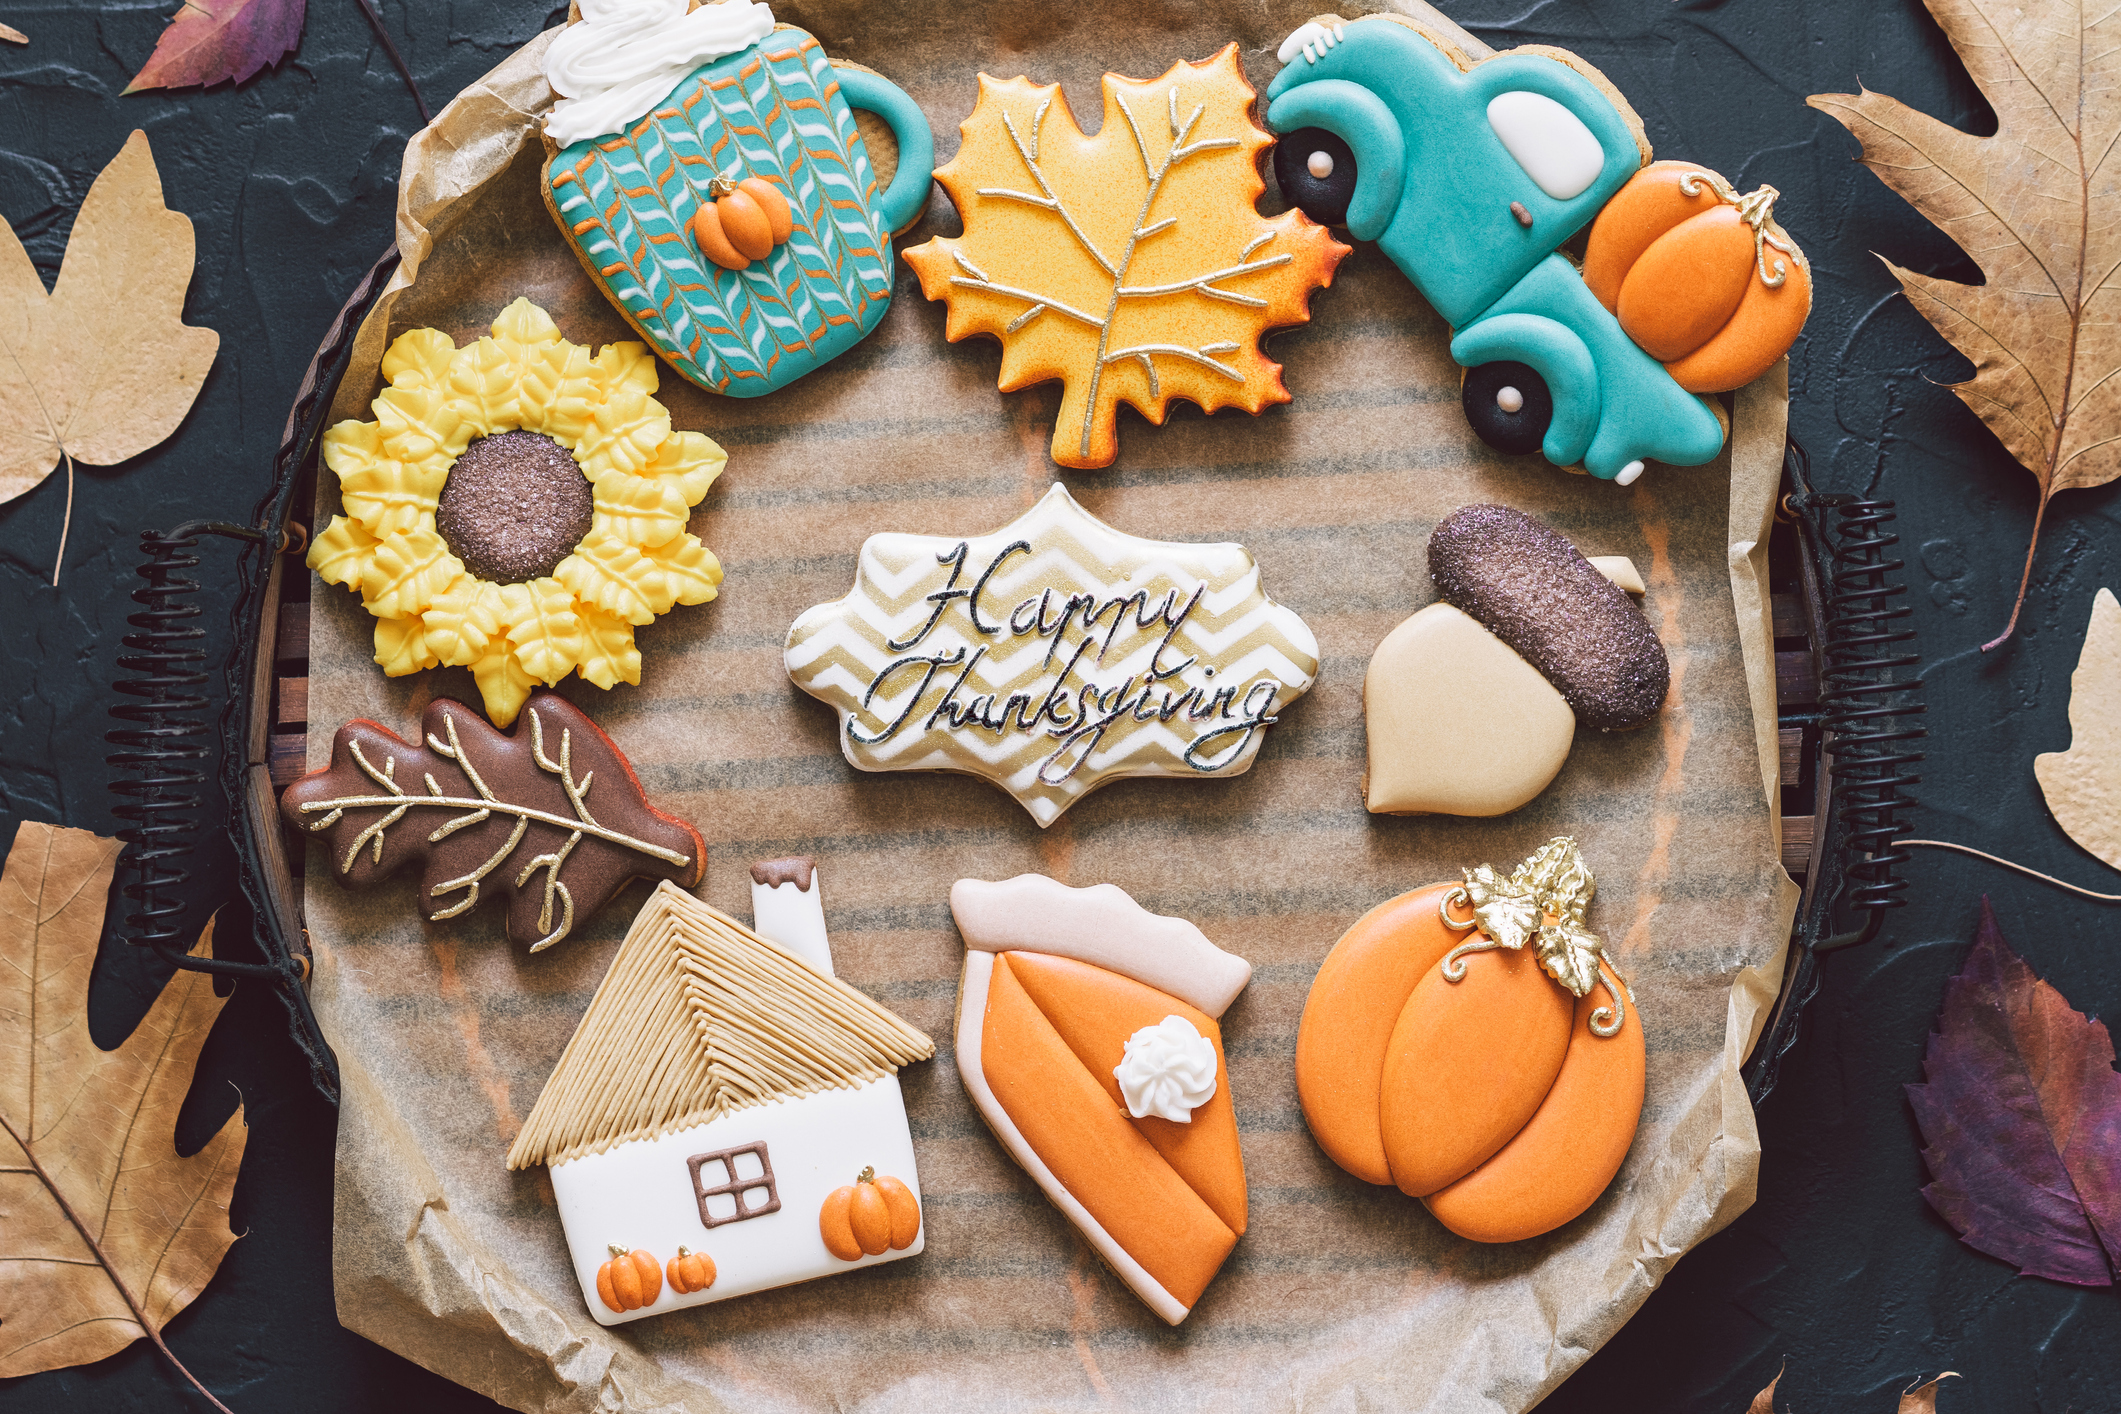 Thanksgiving Etiquette Q&A | tray of Thanksgiving sugar cookies, frosted in different fall colors